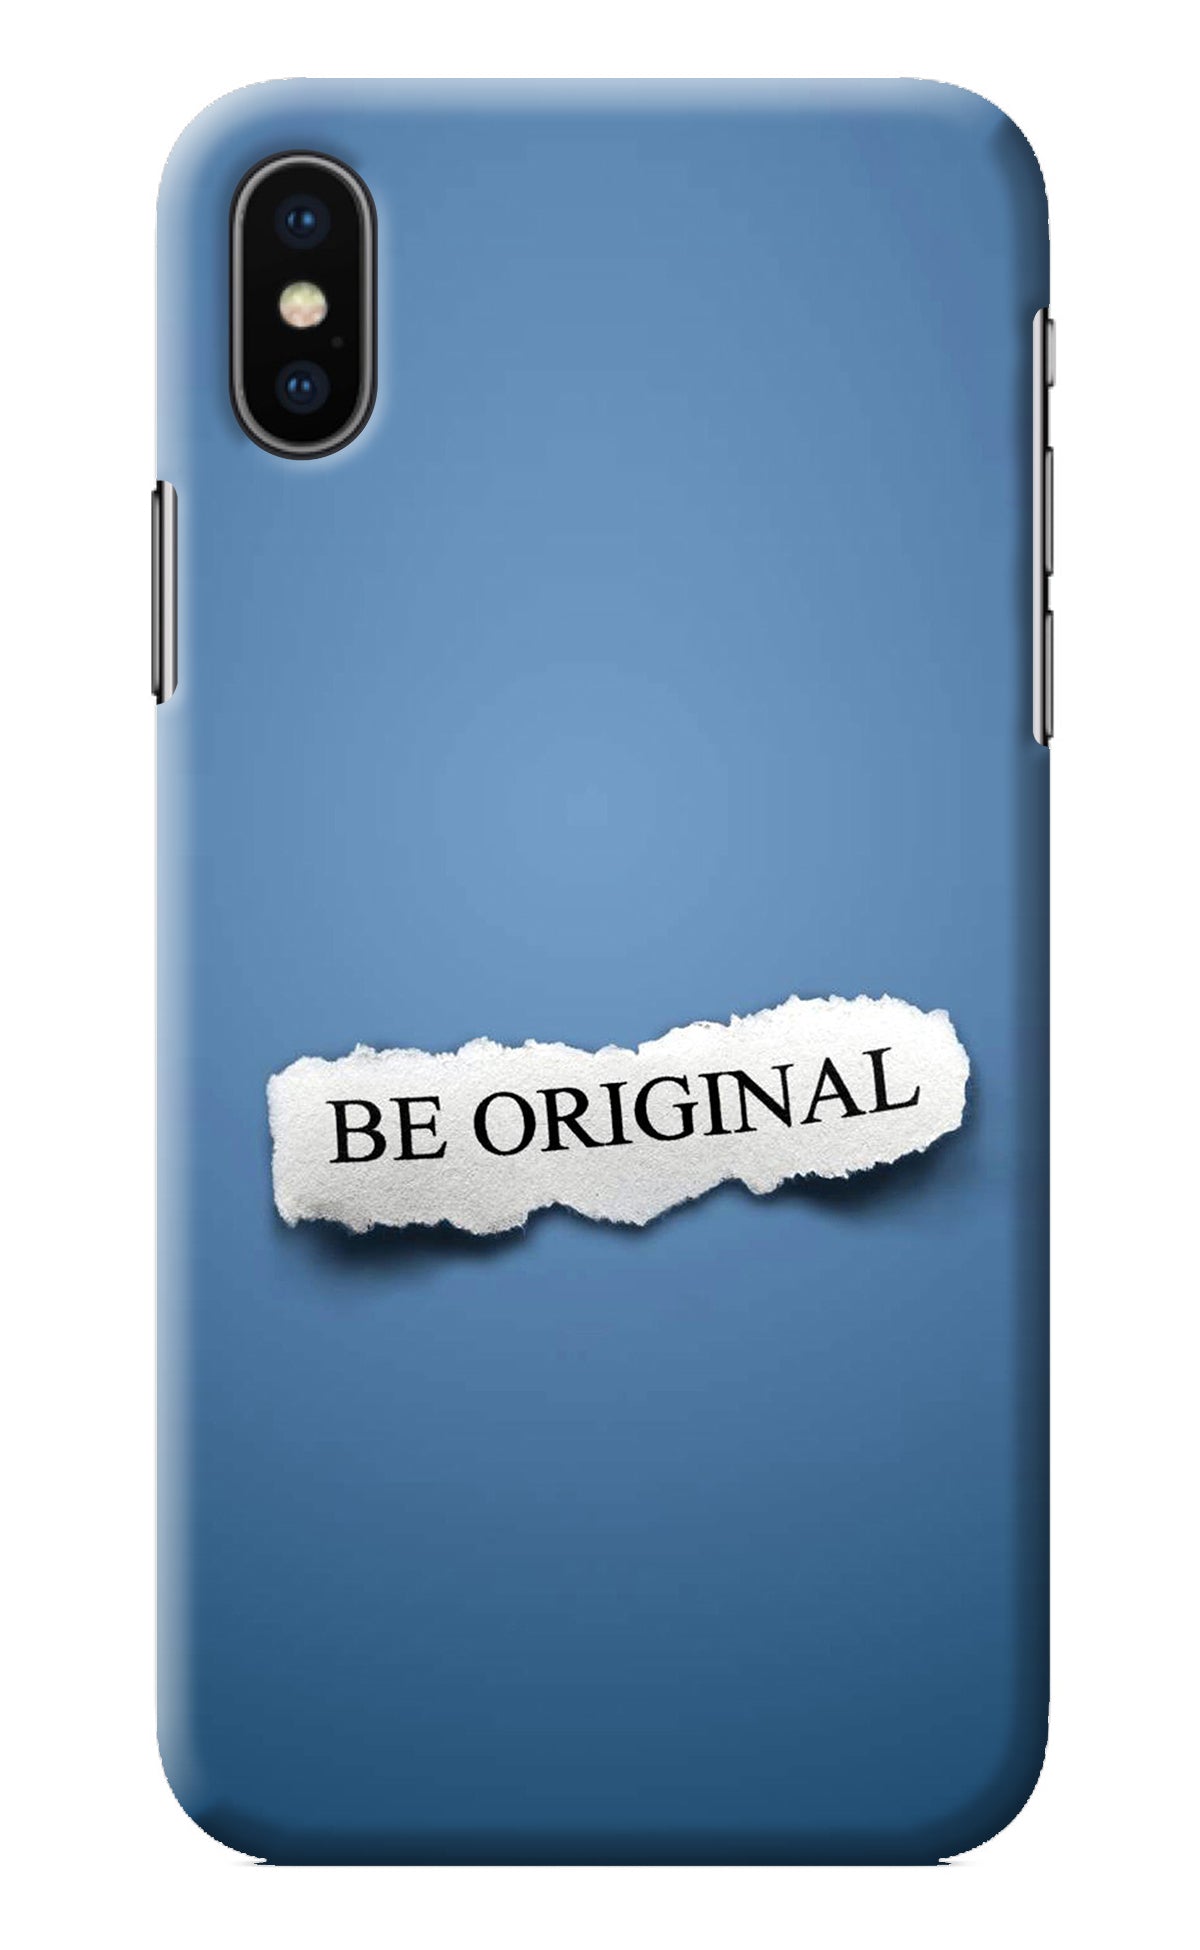 Be Original iPhone XS Back Cover